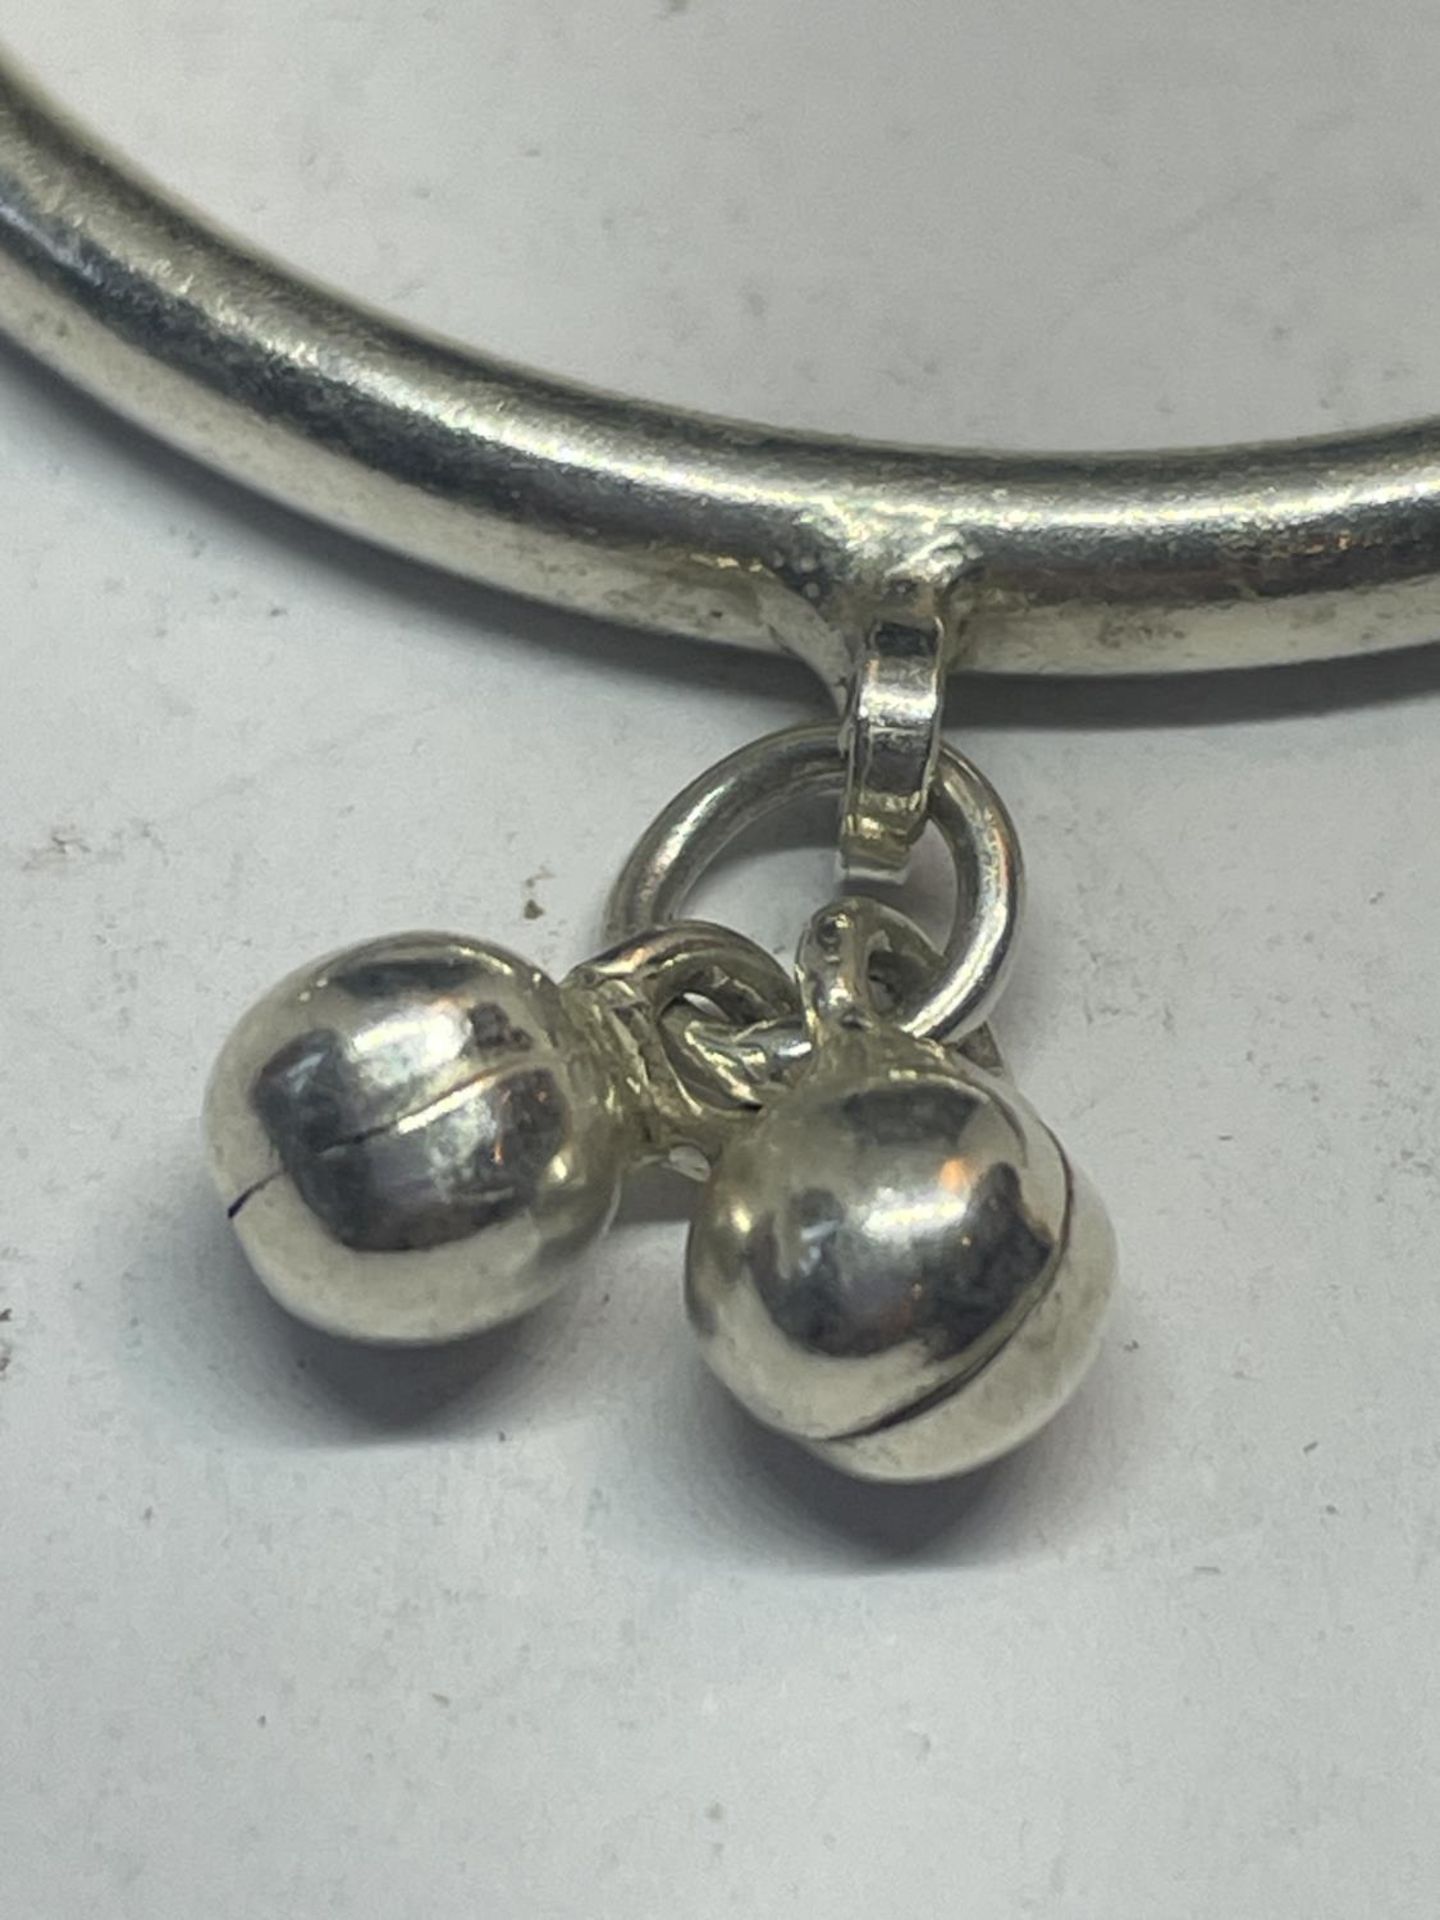 A BABY'S SILVER BANGLE WITH CHARMS - Image 2 of 3